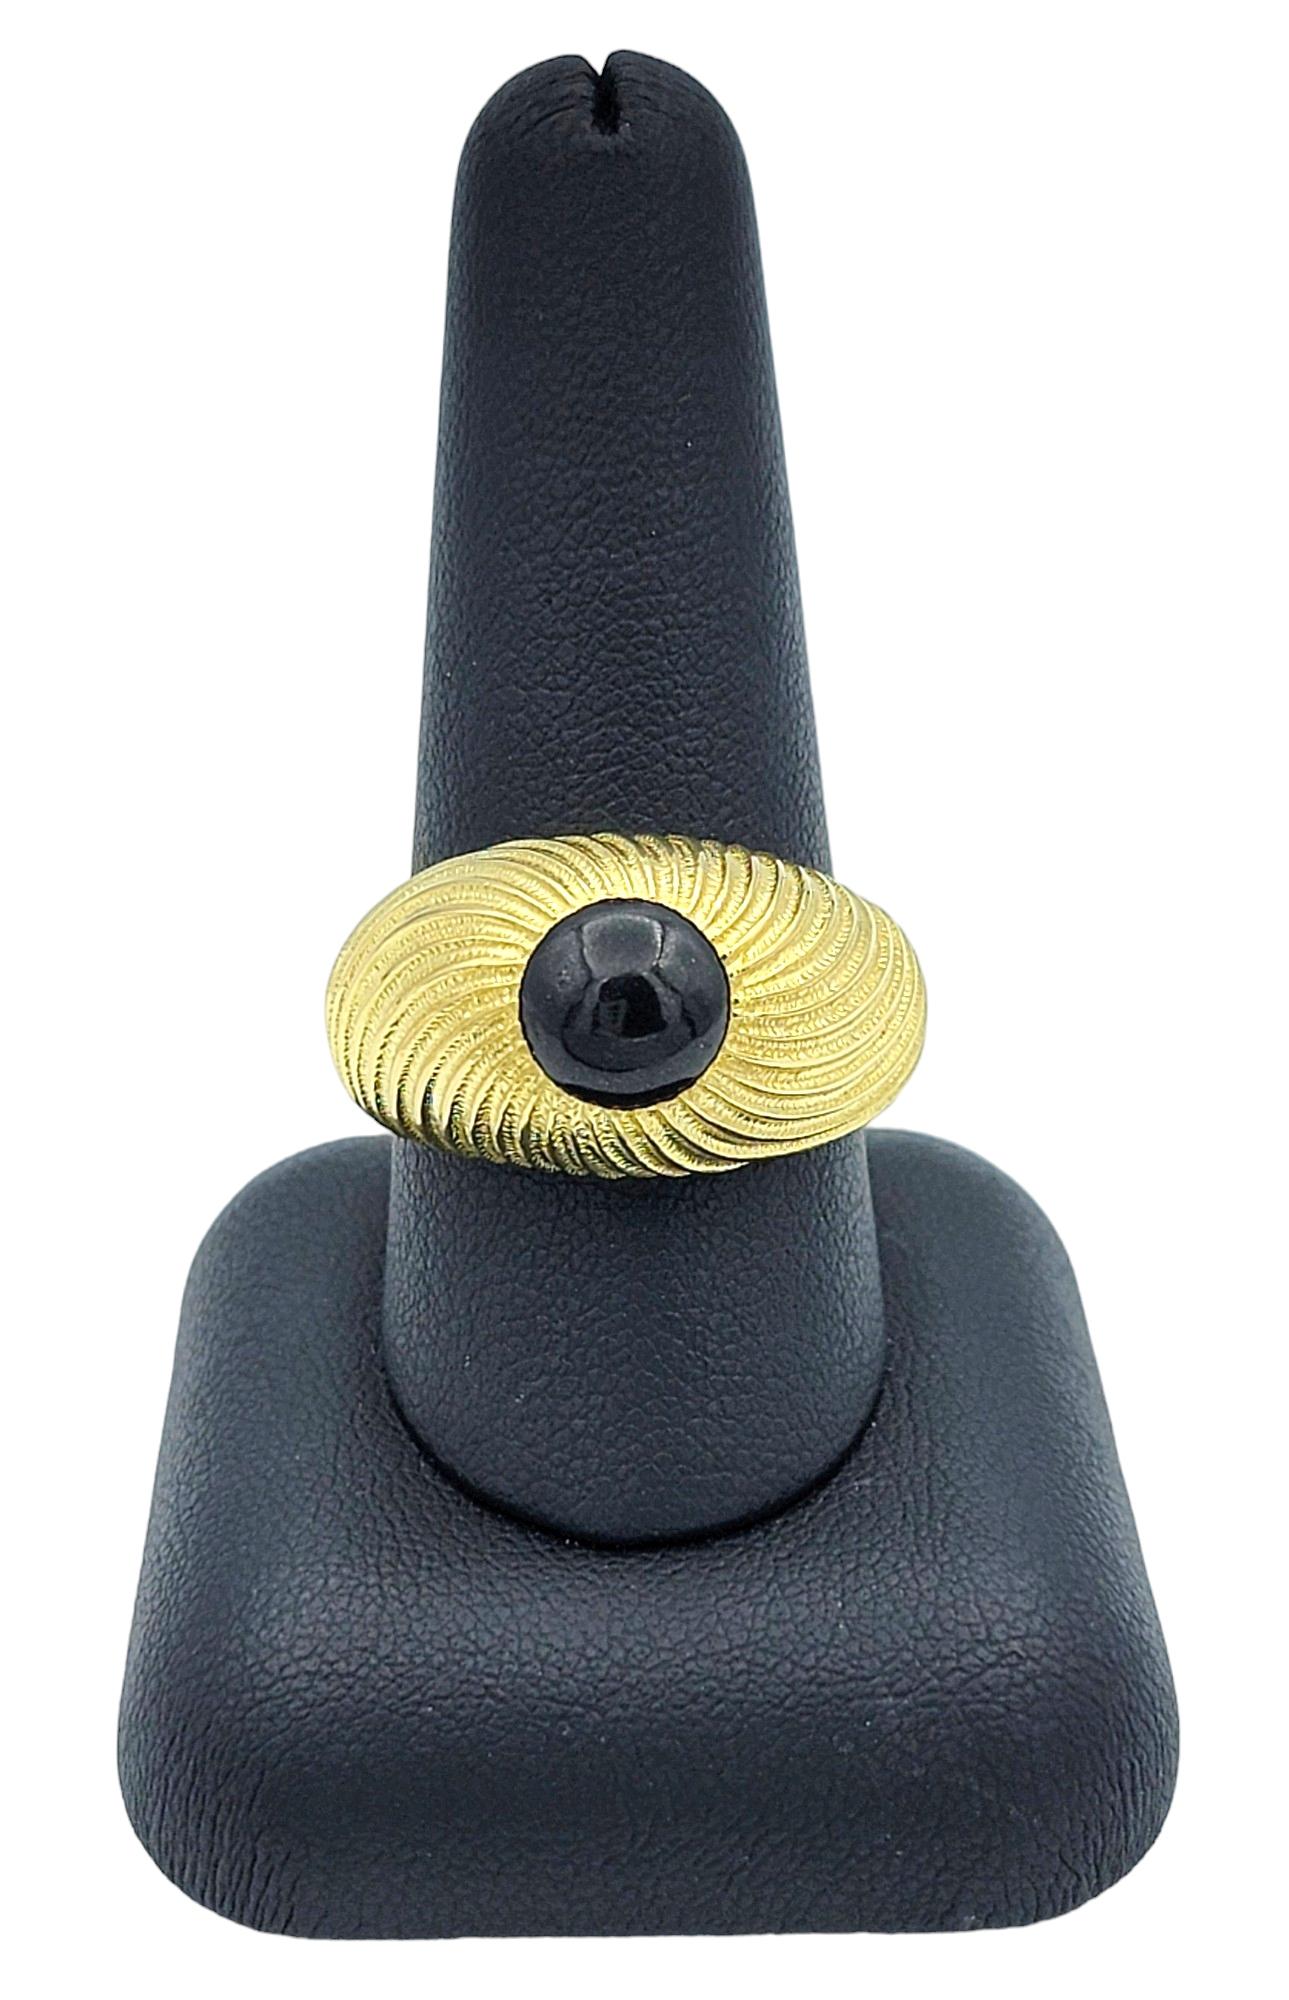 Tiffany & Co. Schlumberger Shrimp Style Black Onyx Ring in 18 Karat Yellow Gold For Sale 5